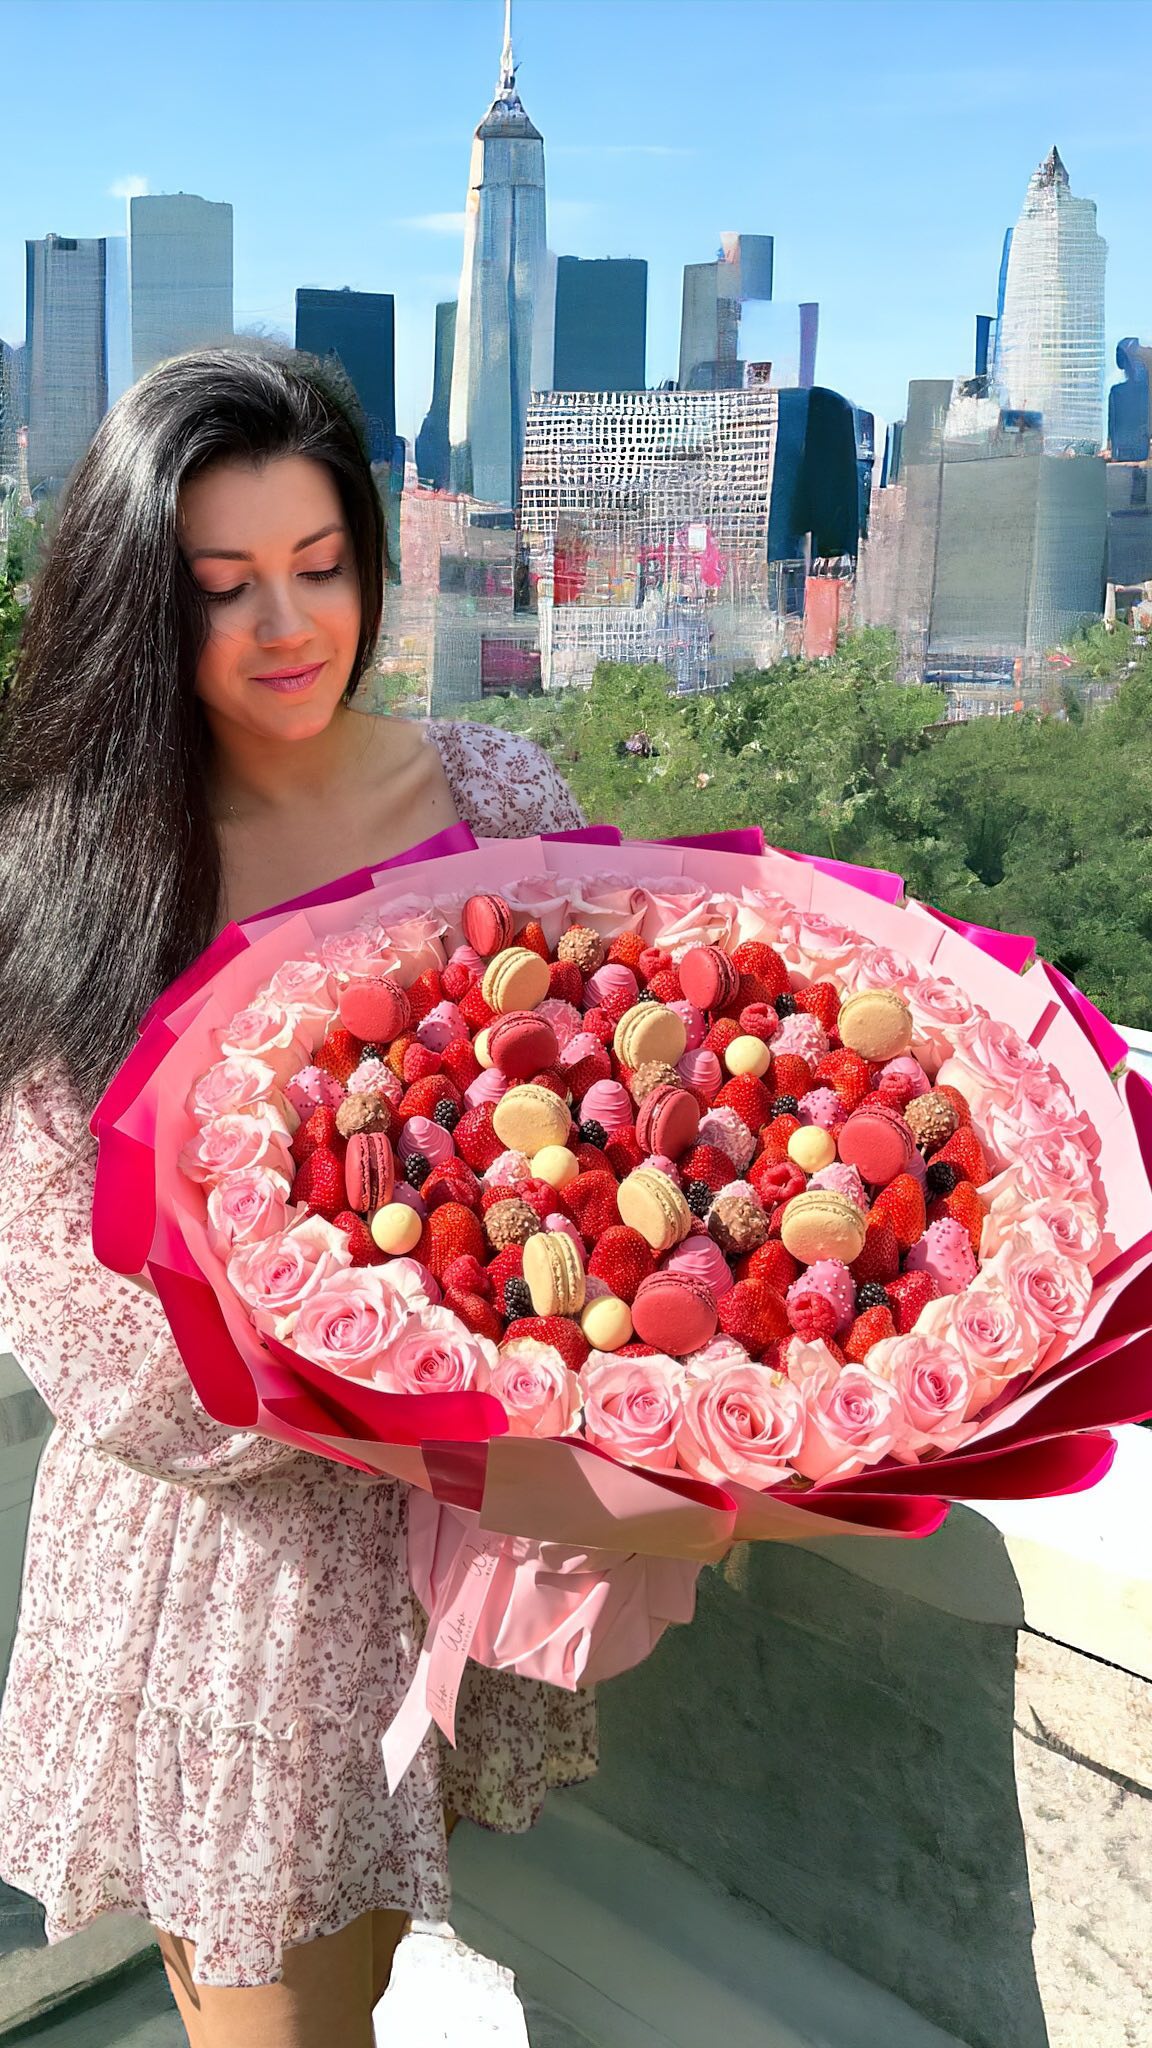 “Pink Romance & Macarons,” a luxurious fruit bouquet that’s a testament to love and refinement.